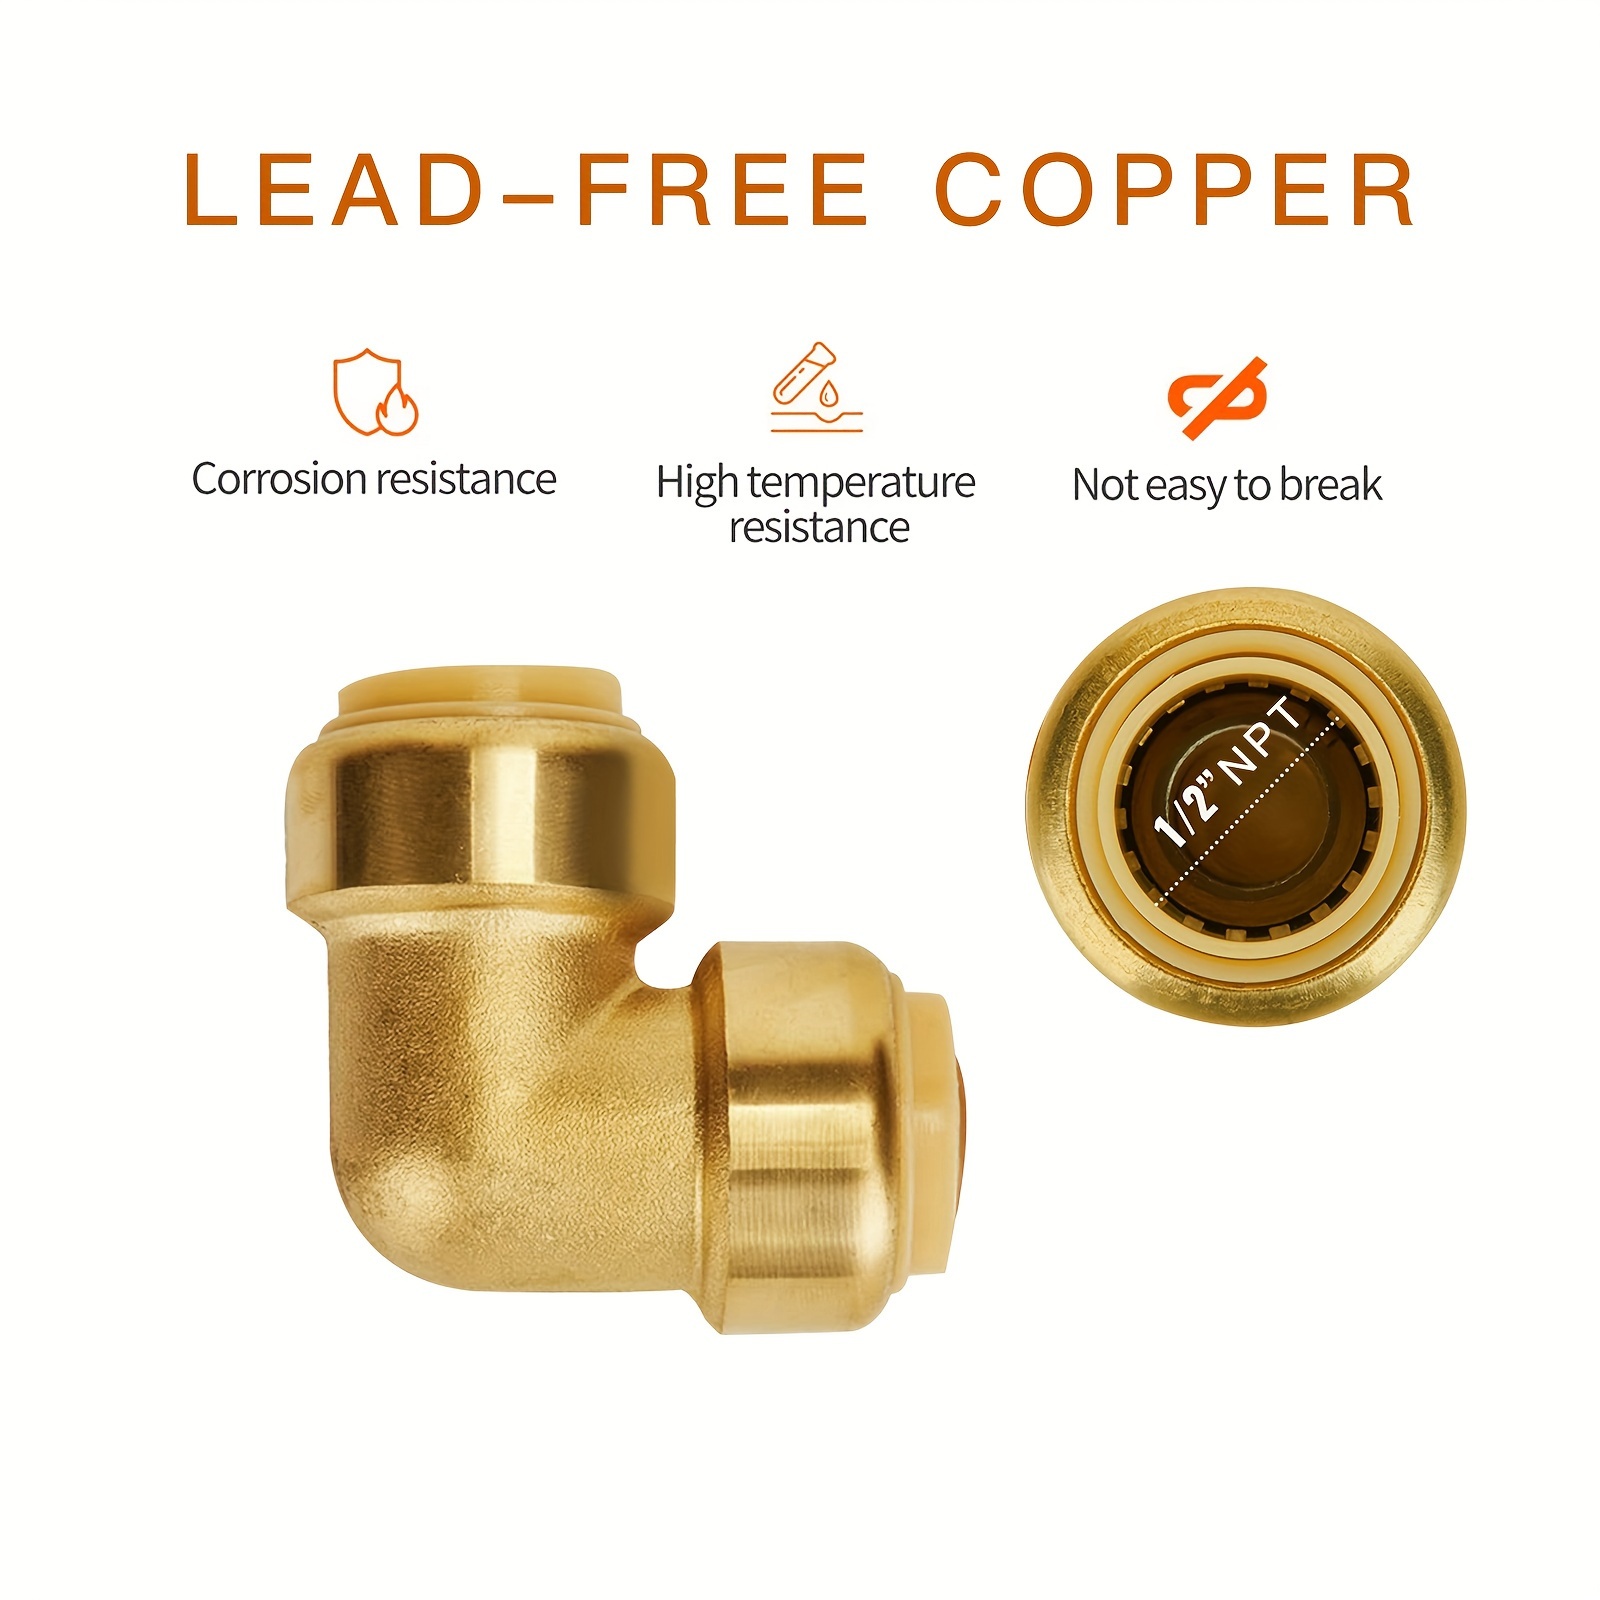 

2pcs Push-fit 1/2in Npt 90-degree Elbow, Push Fit Elbow Plumbing Fittings 1/2in Npt, No Lead Brass Push To Connect Pex, Copper,